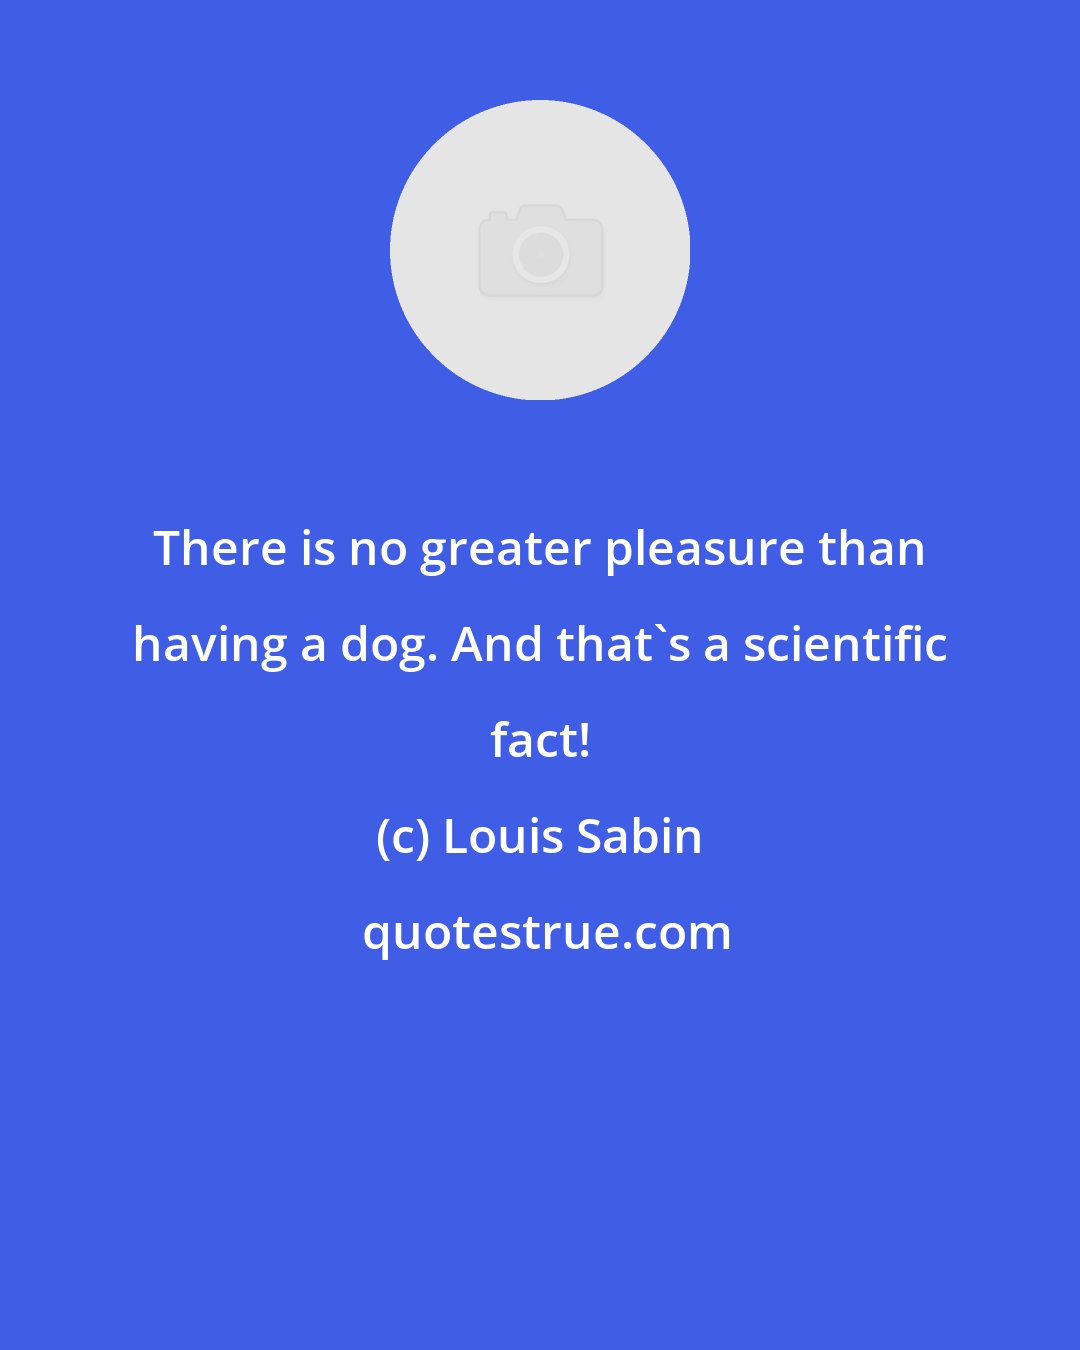 Louis Sabin: There is no greater pleasure than having a dog. And that's a scientific fact!